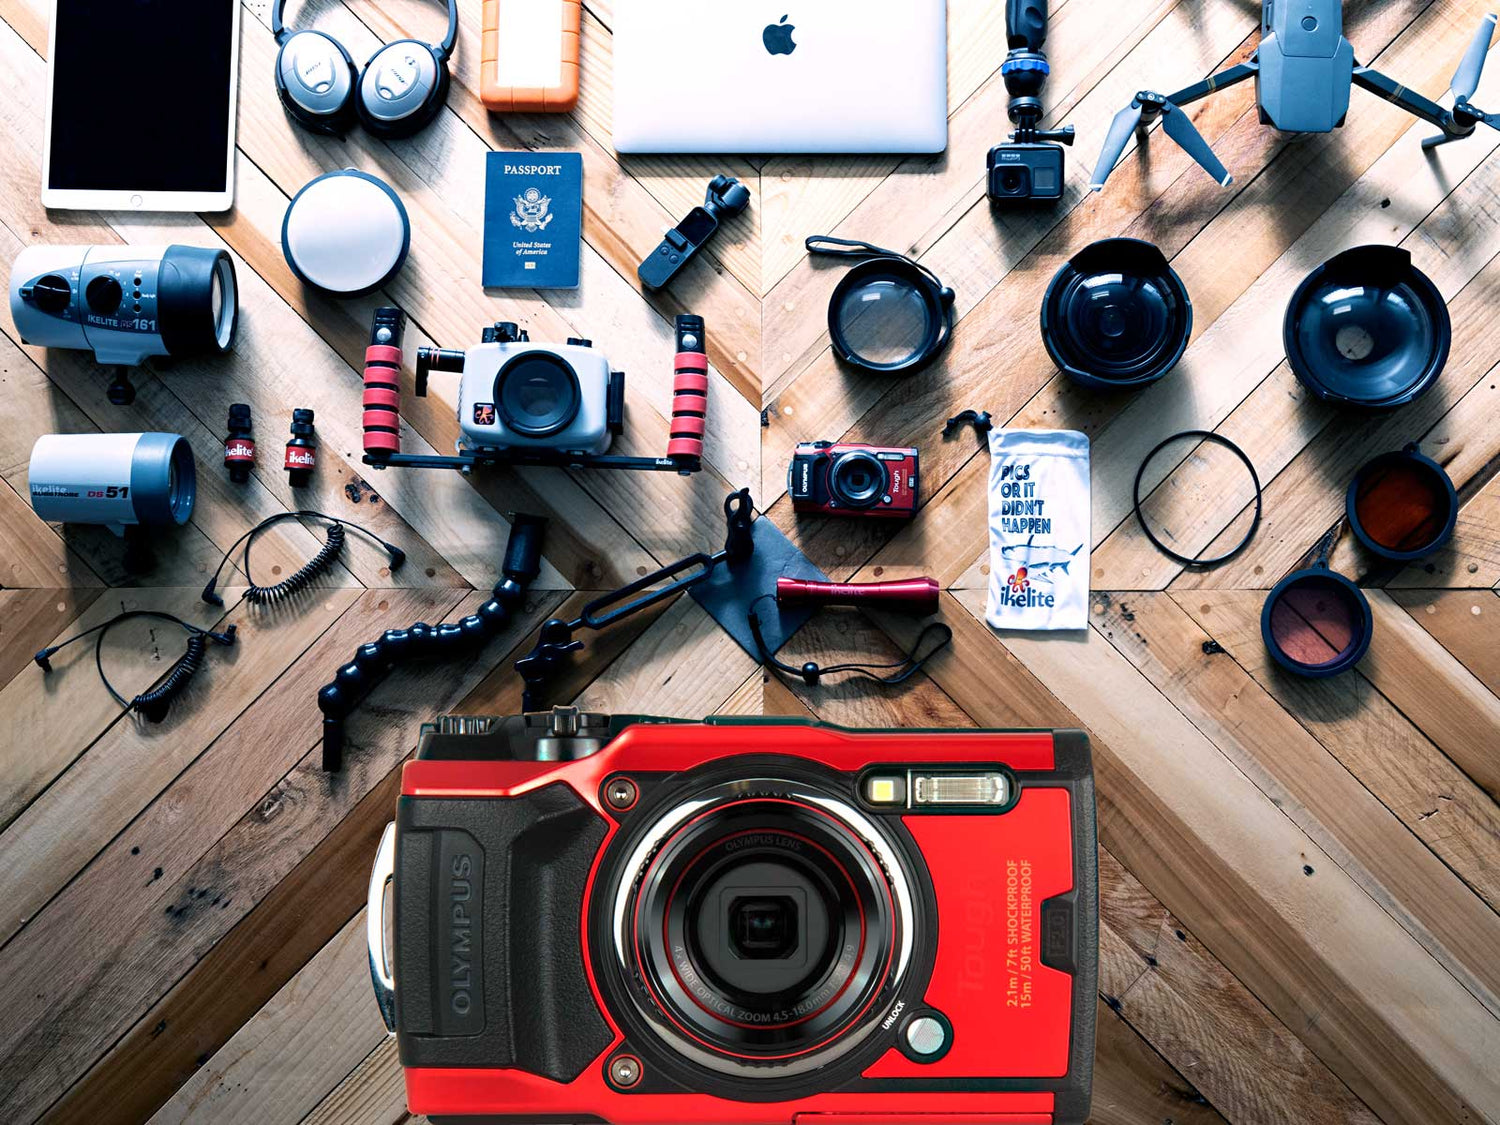 How Accessorize the Olympus Tough TG-5, TG-6 System